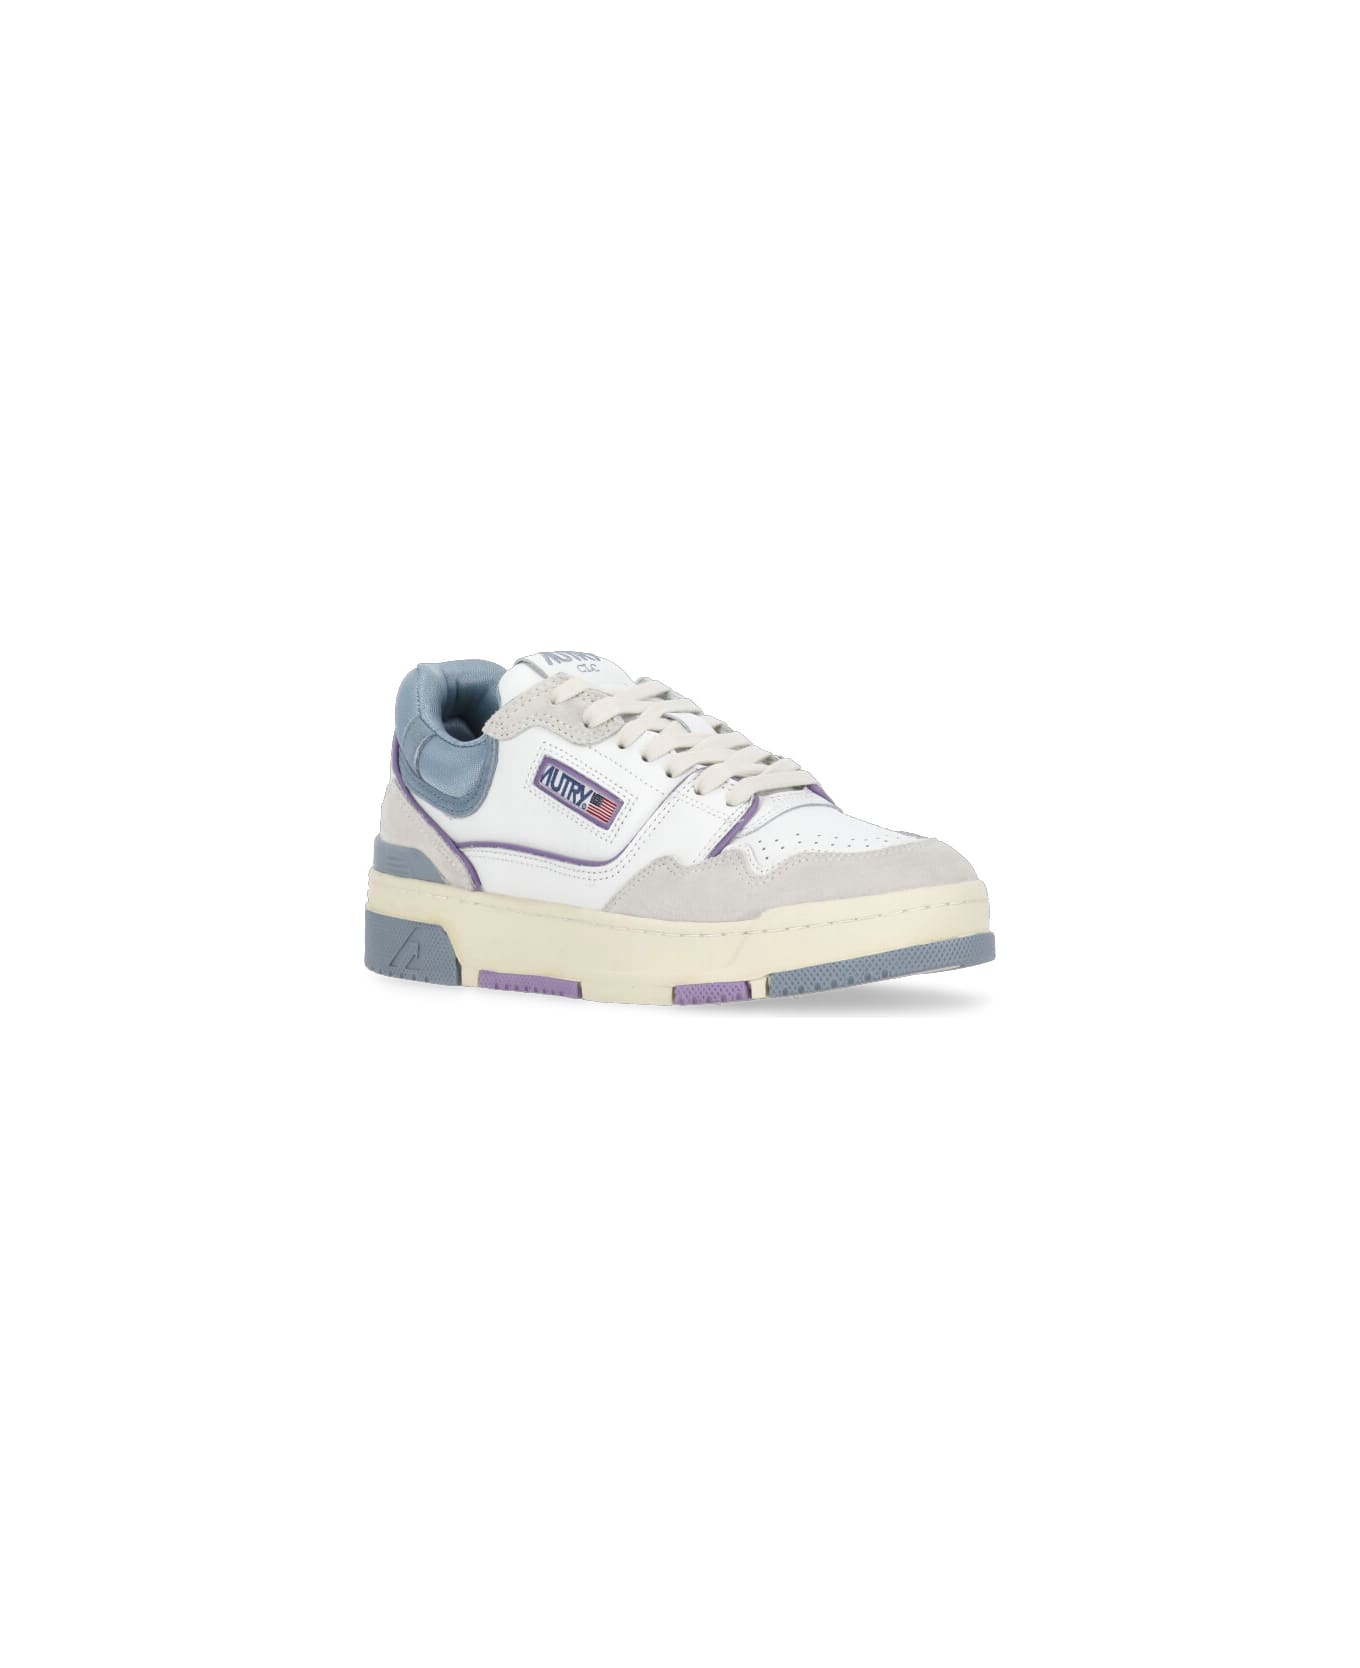 Autry Clc Low Sneakers - White